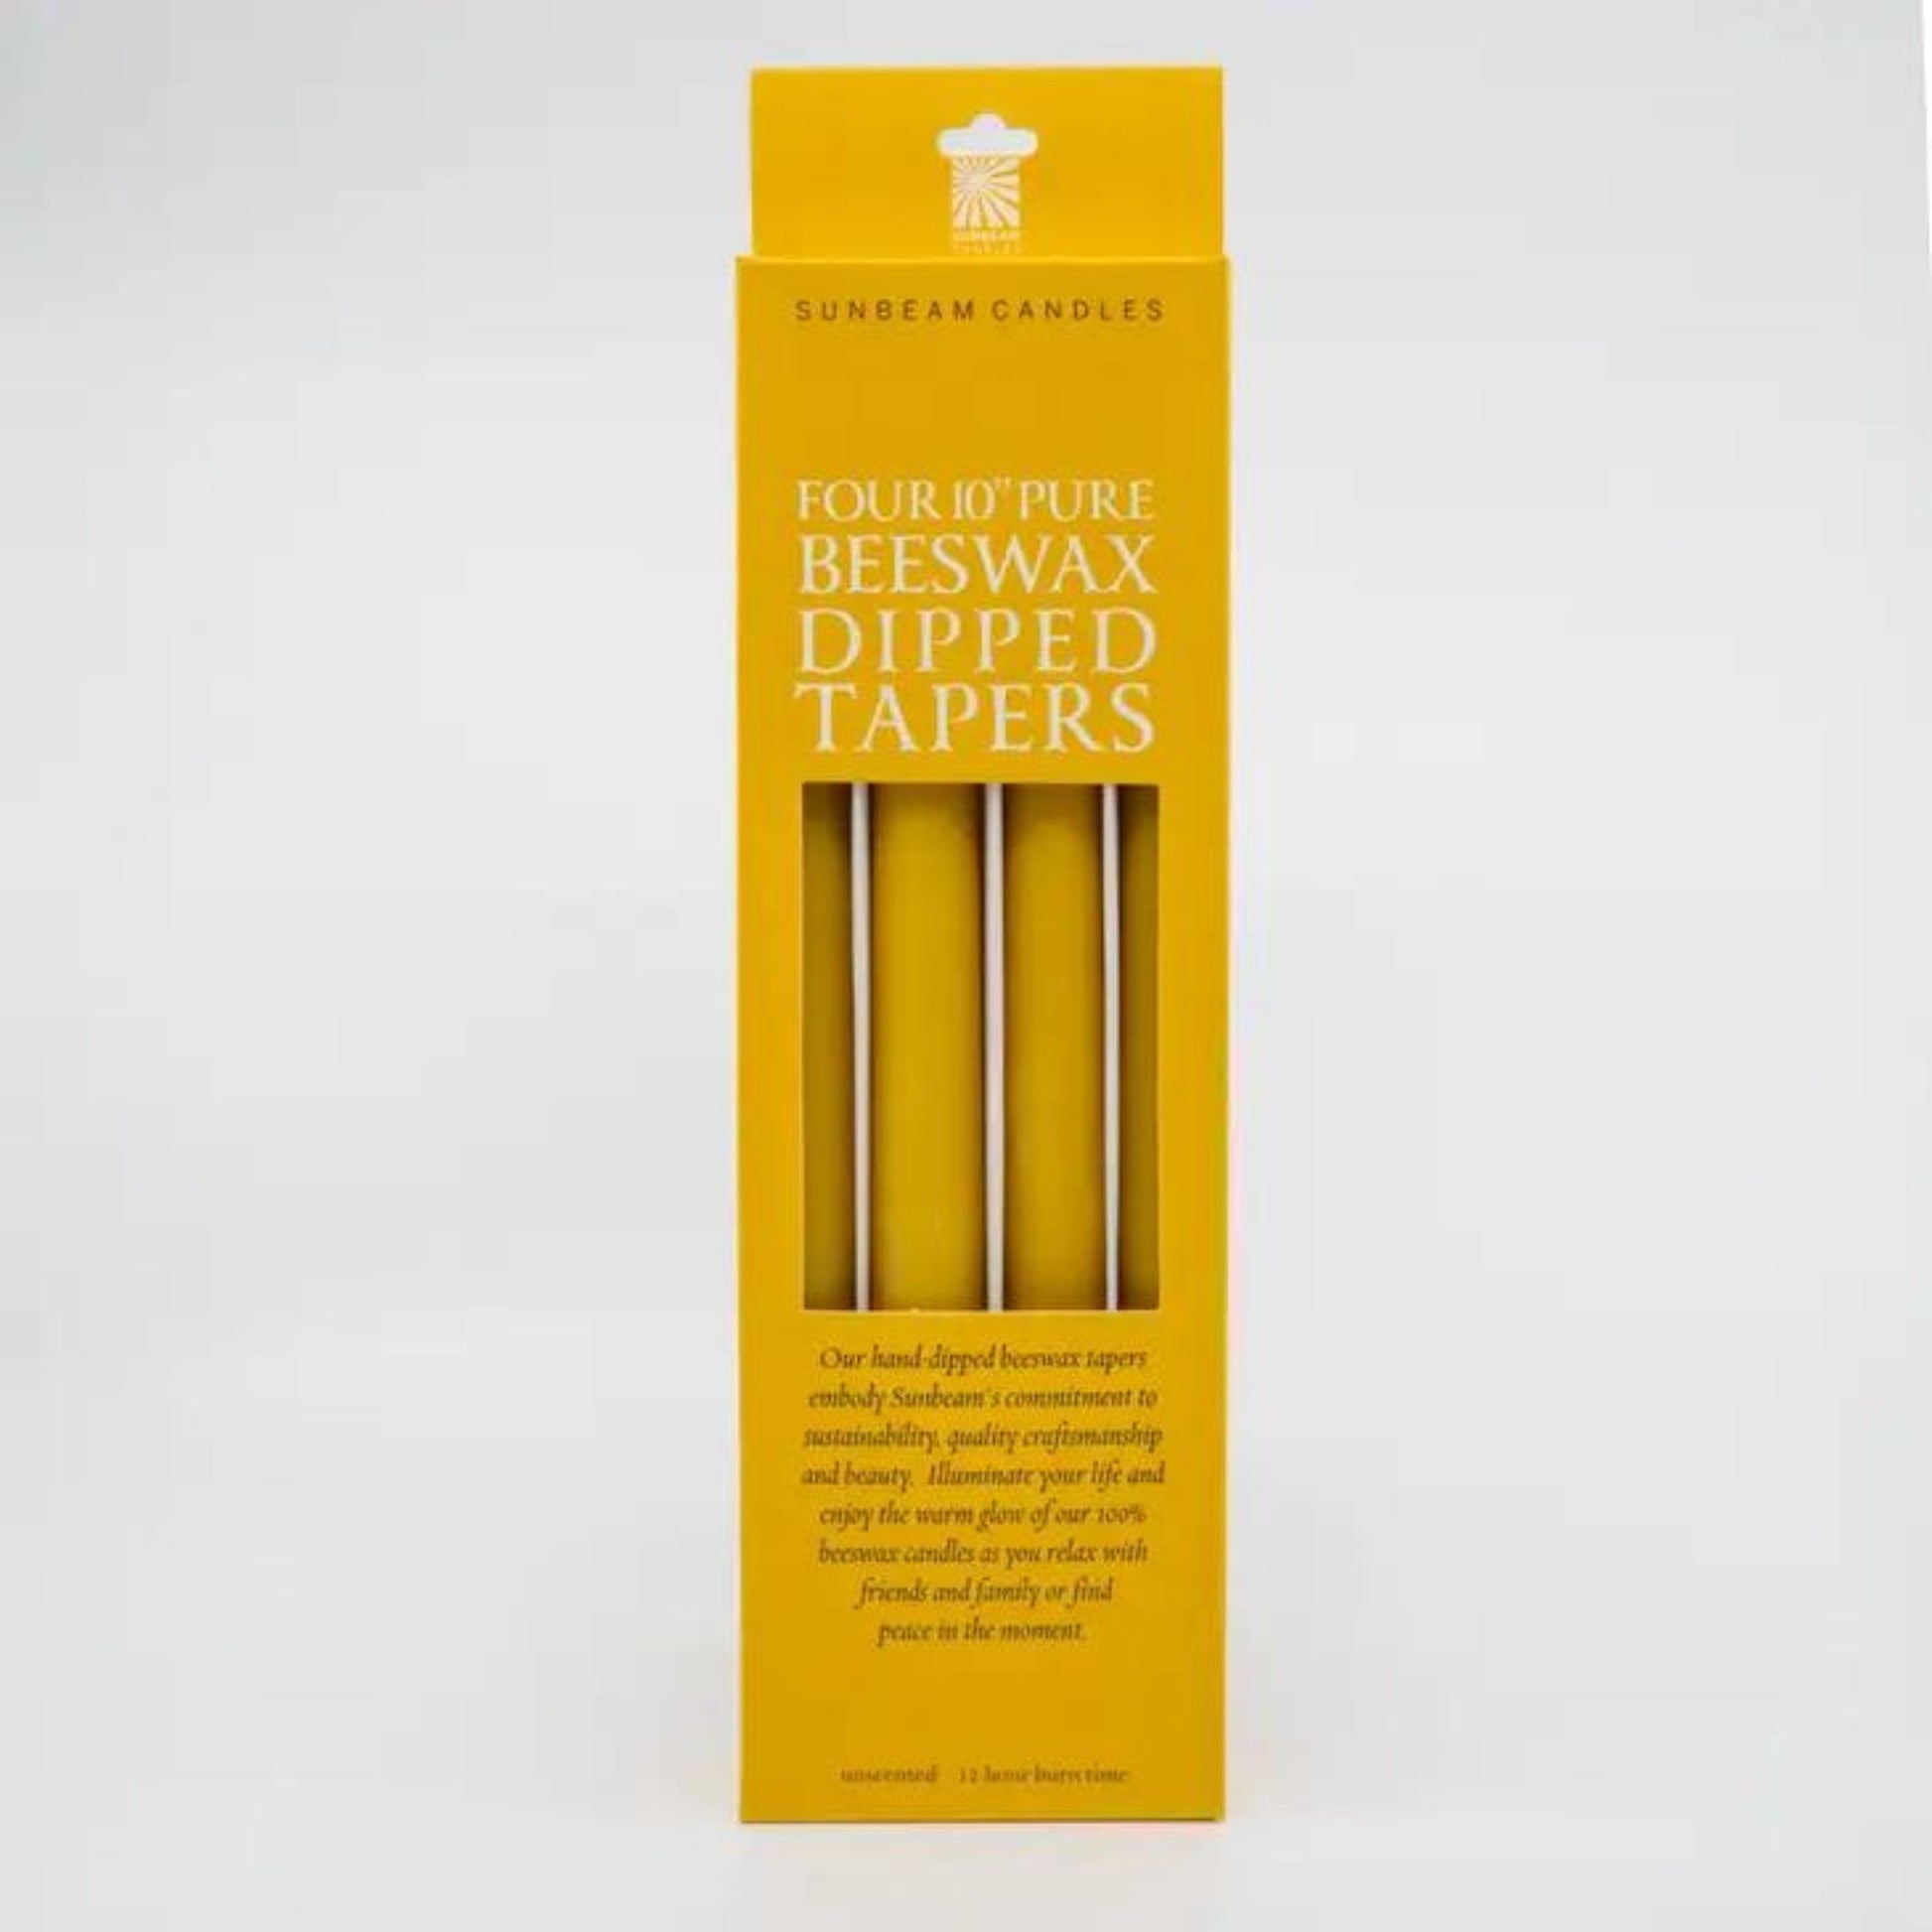 Beeswax Taper Candles Box of 4. Created using 100% pure beeswax, eco-friendly dyes, and a cotton wick. Burntime 12 hours each.